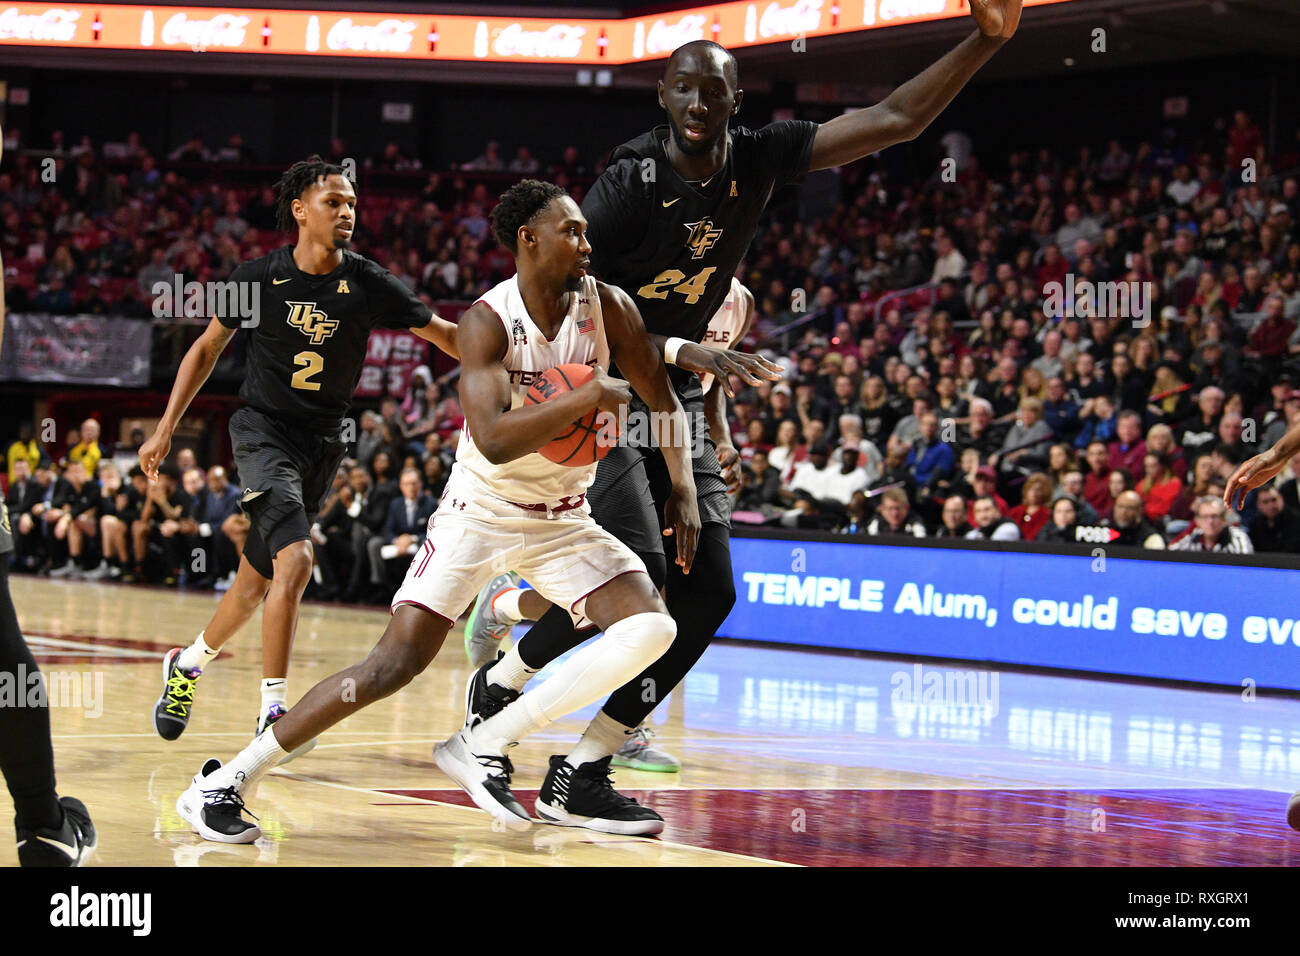 Philadelphia, Pennsylvania, USA. 9th Mar, 2019. Temple Owls guard SHIZZ ALSTON JR. (10) drives as he is defended by UCF Knights center TACKO FALL (24) during the American Athletic Conference basketball game played at the Liacouras Center in Philadelphia. Temple beat #25 UCF 67-62. Credit: Ken Inness/ZUMA Wire/Alamy Live News Stock Photo